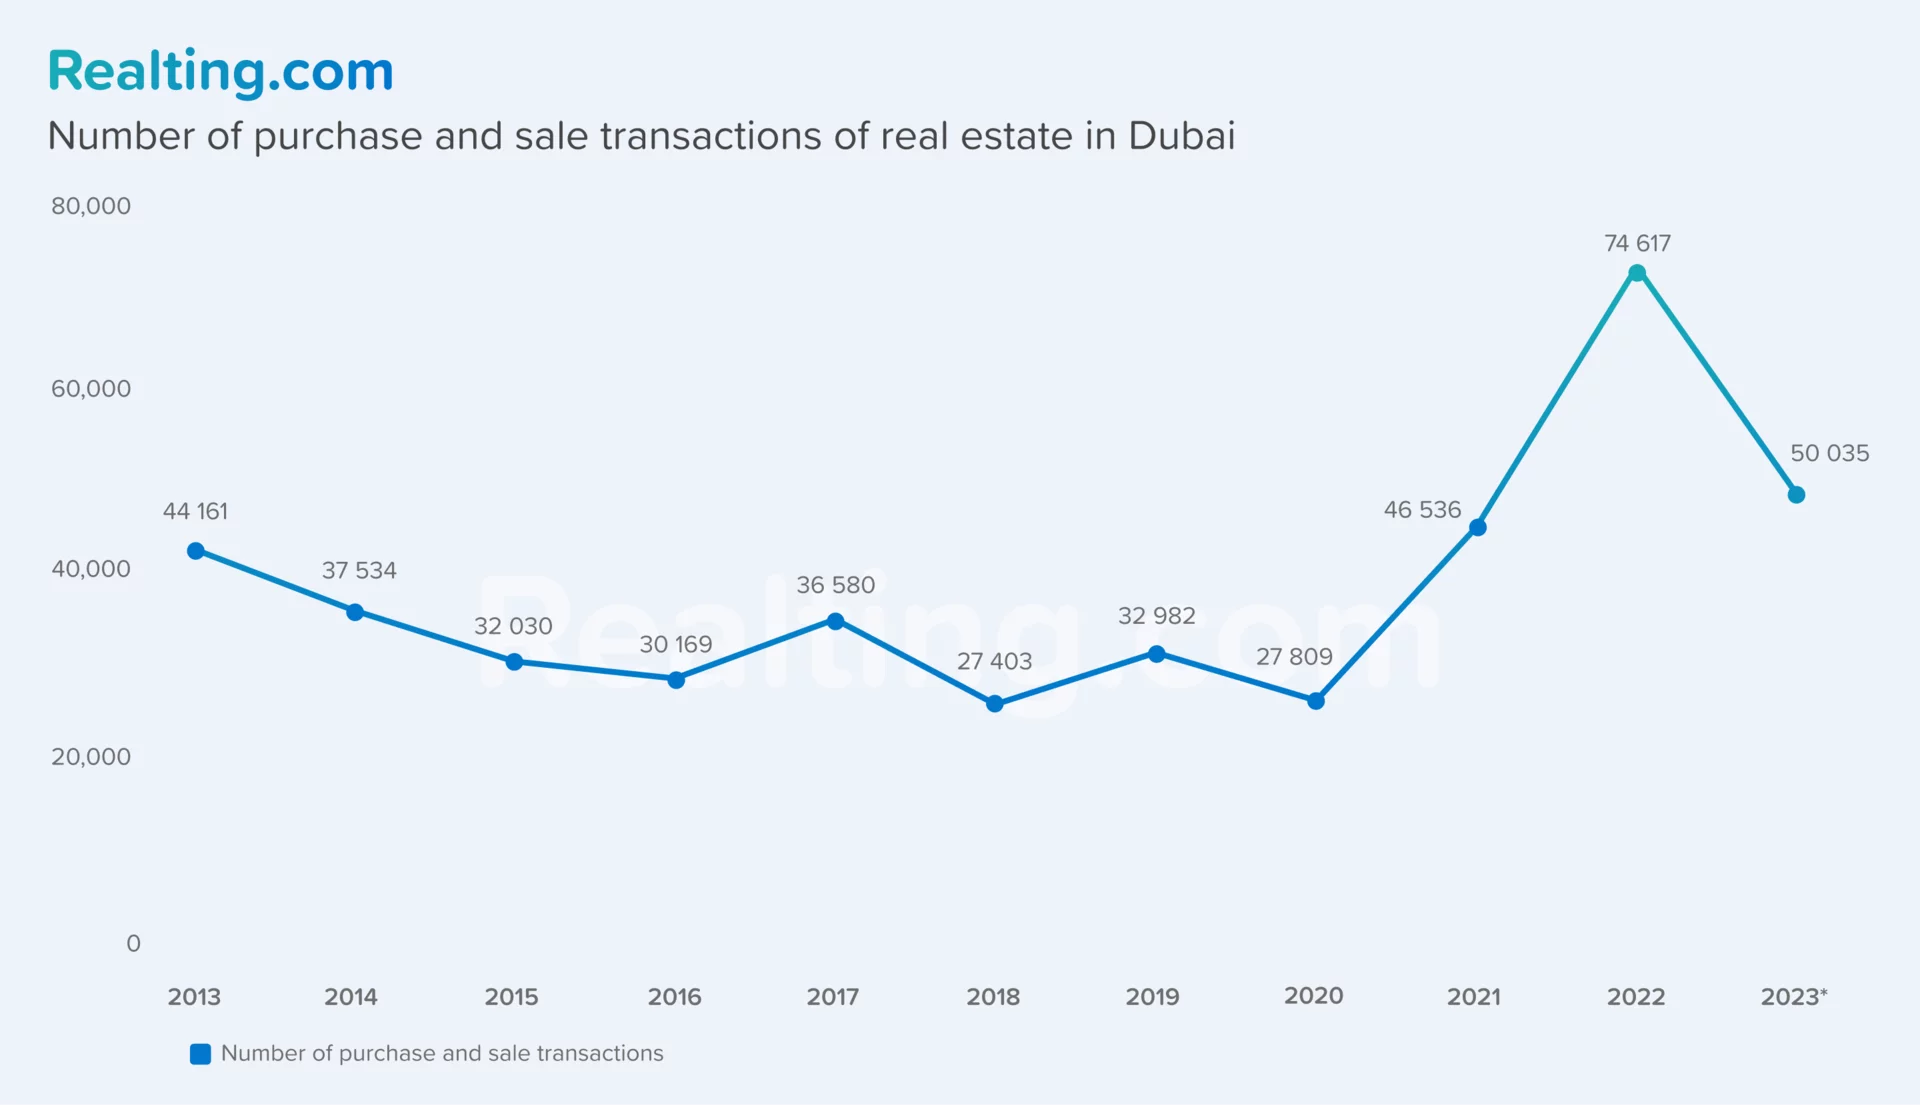 Number of purchase and sale transactions of real estate in Dubai